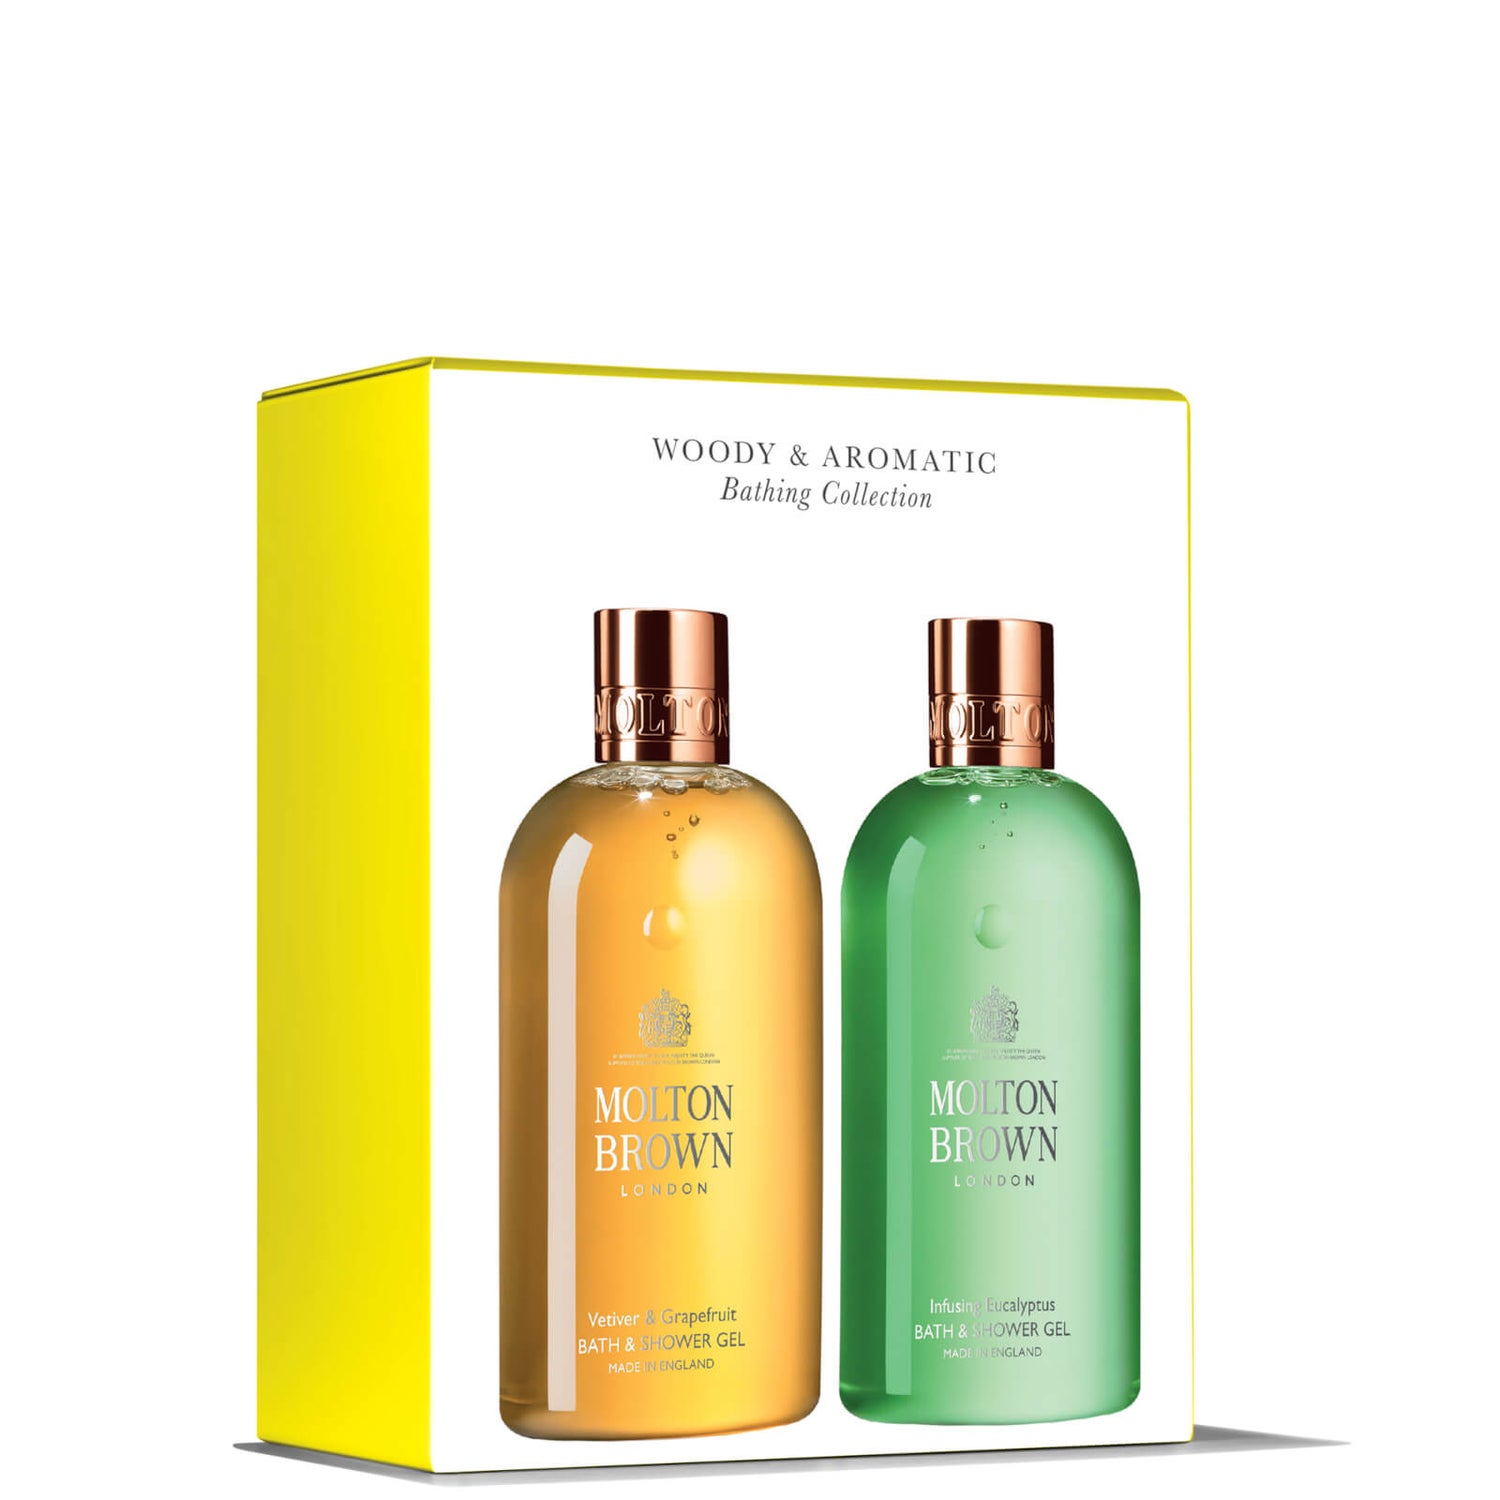 Molton Brown Woody and Aromatic Gift Set